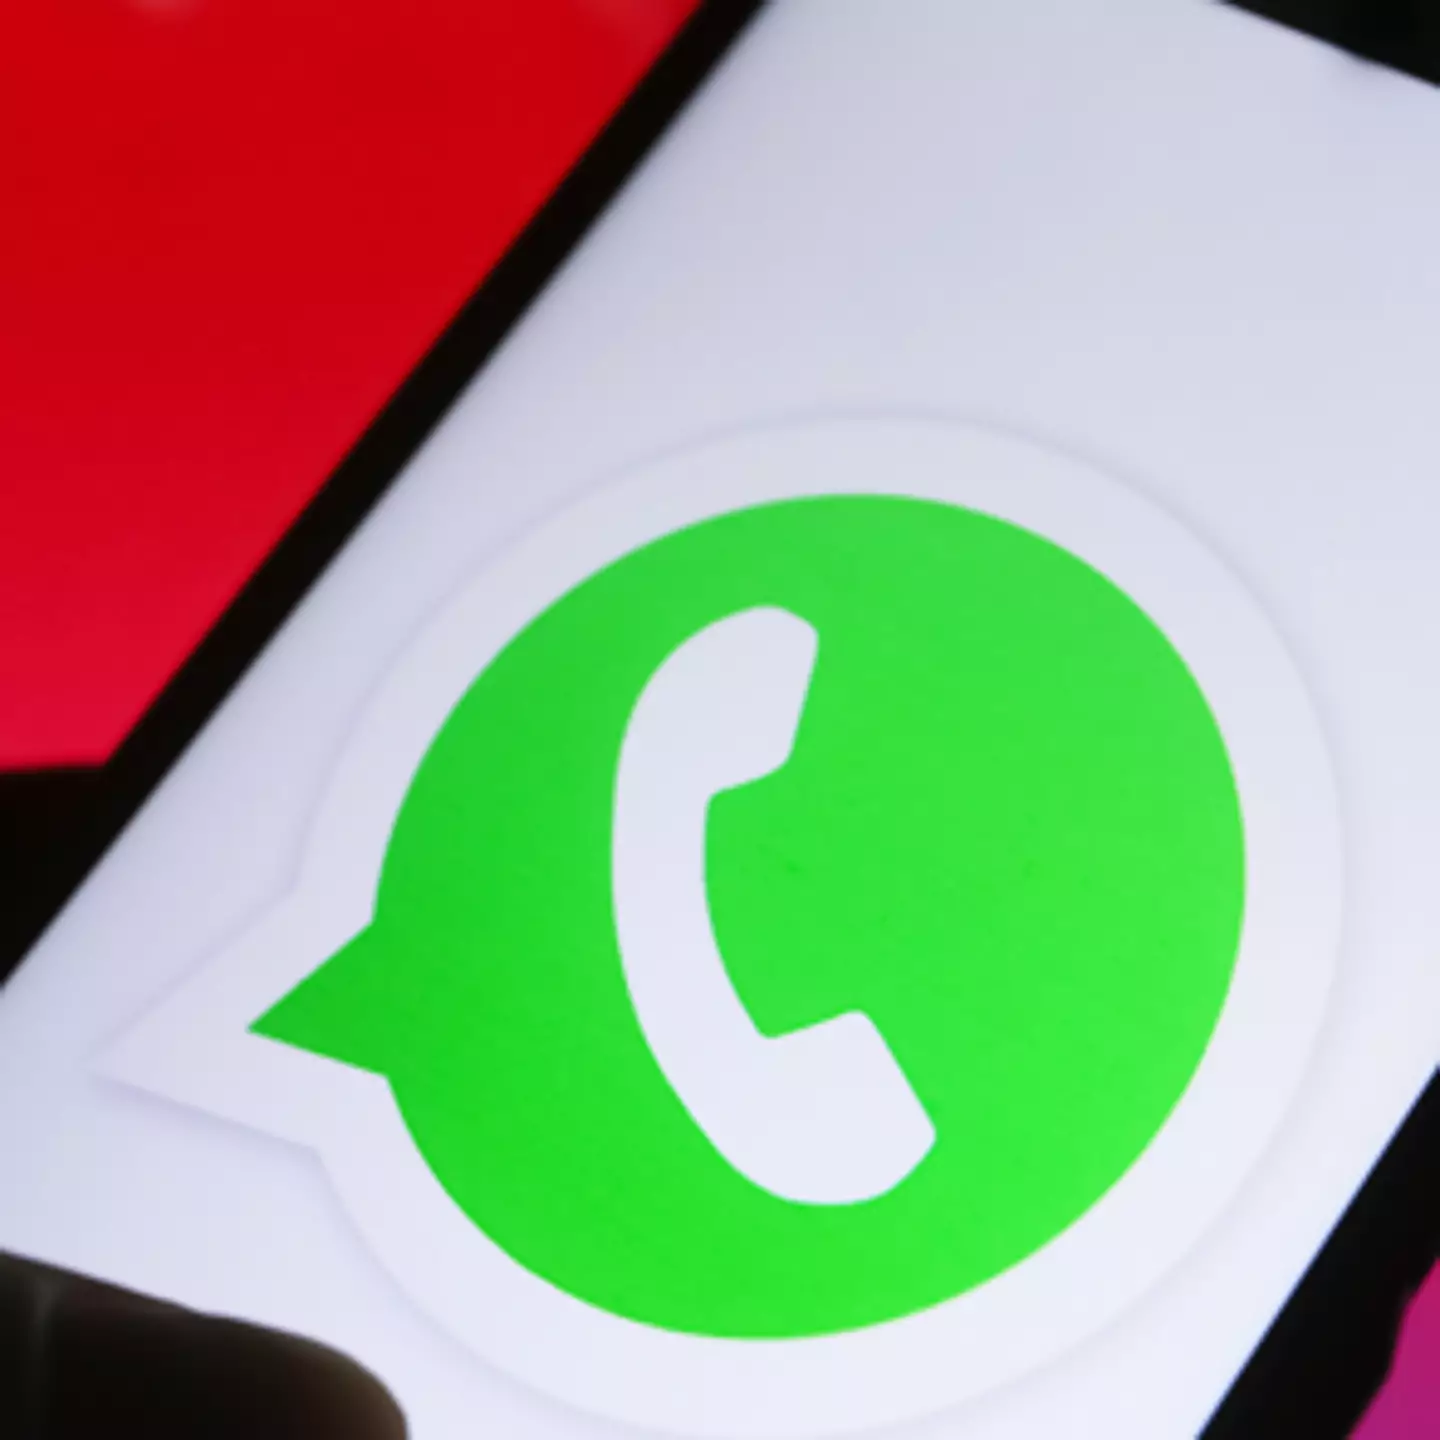 WhatsApp users not happy after waking up to ‘irritating’ change on app